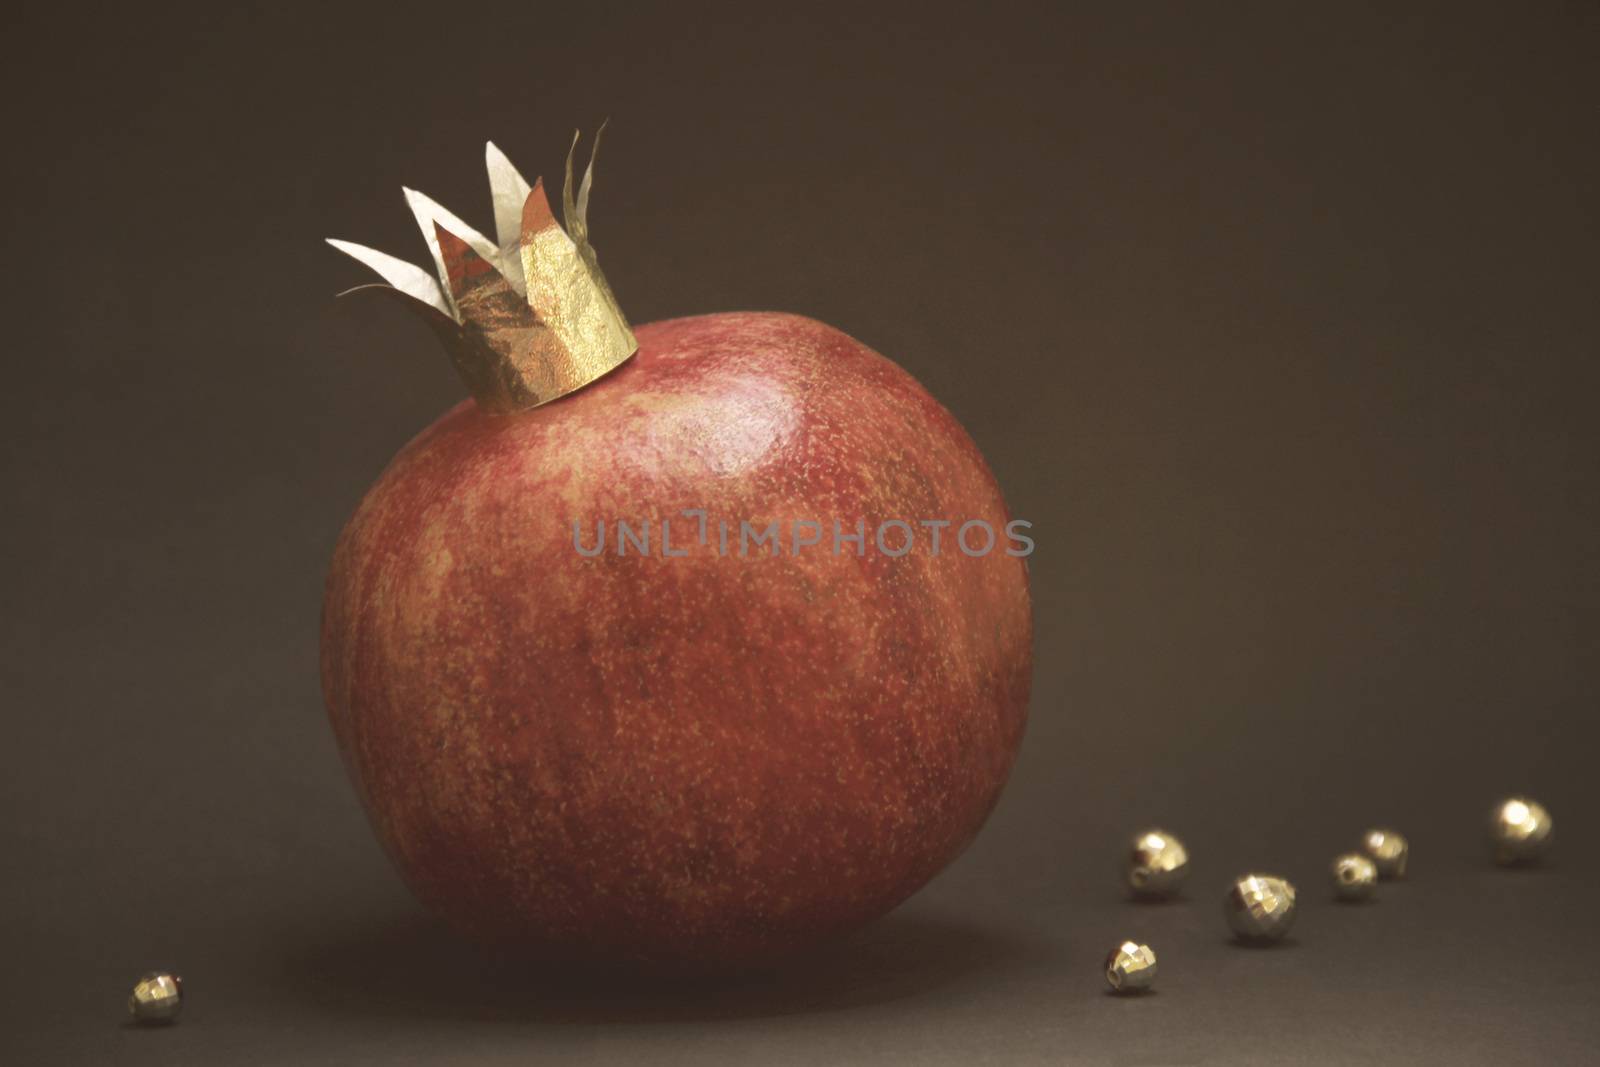 large red pomegranatre or garnet with a golden crown on a vintage background. photo